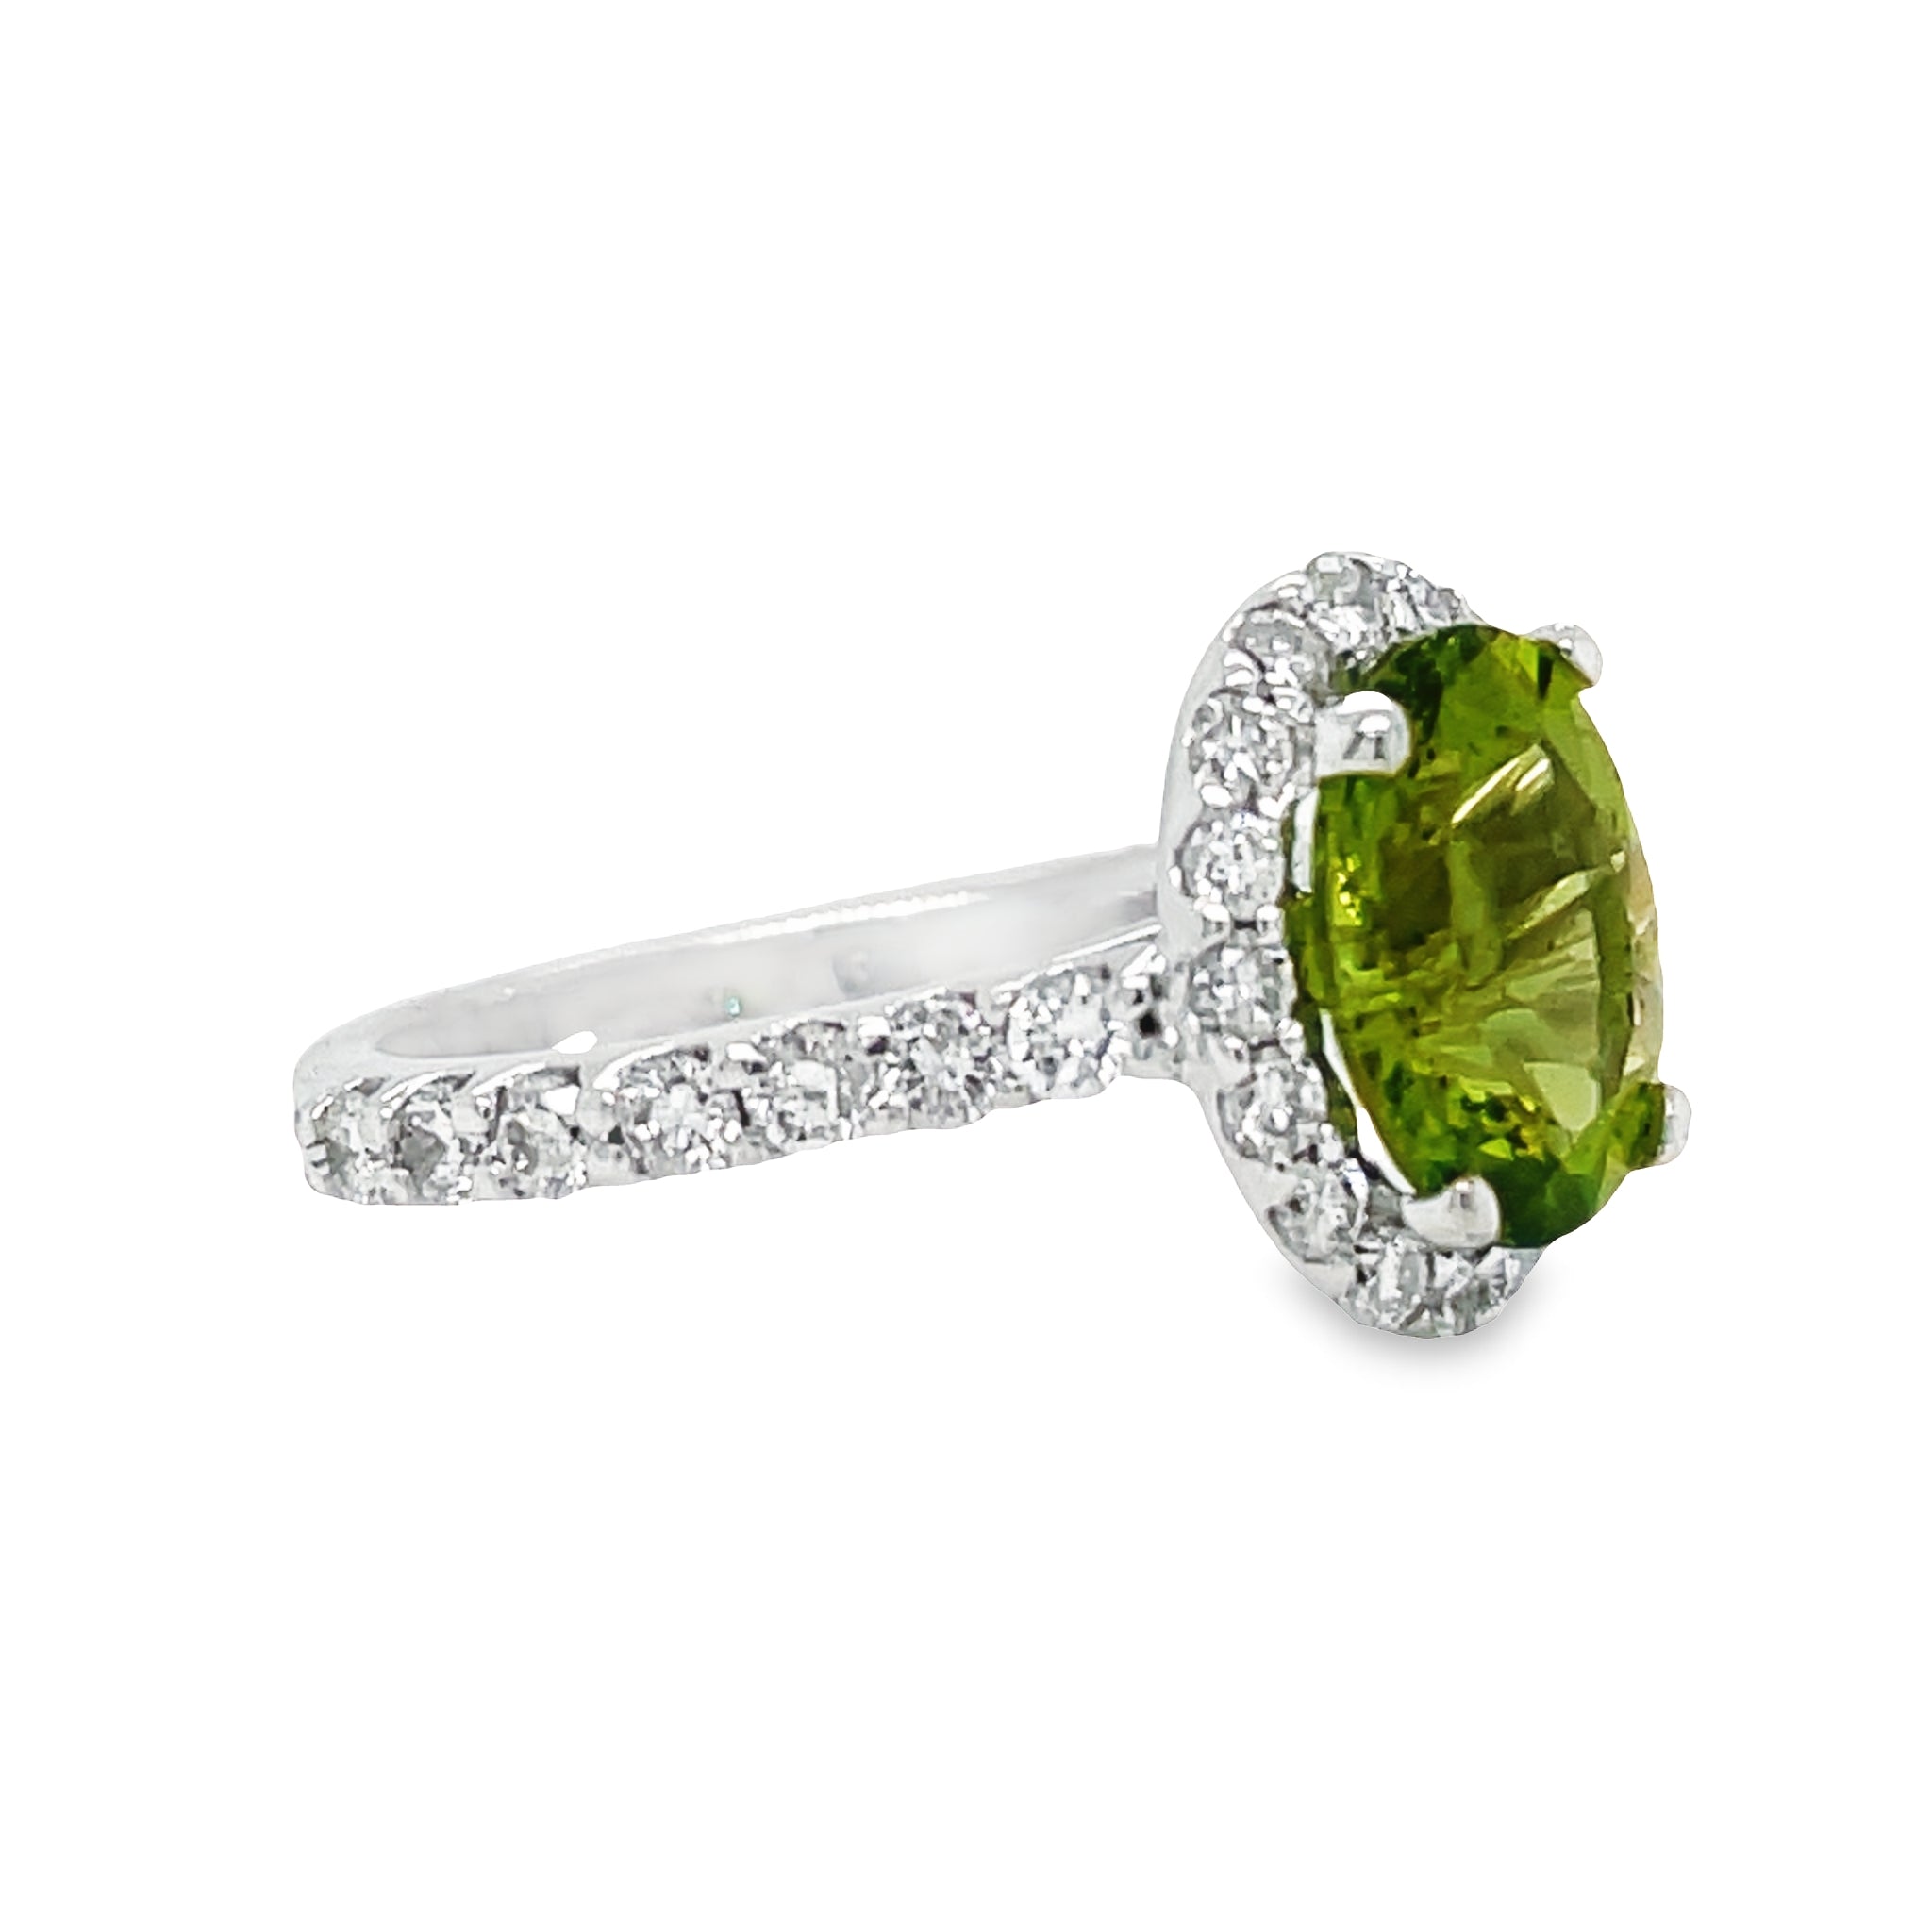 This exquisite Oval Peridot & Diamond Ring is crafted with a brilliant oval peridot paired with dazzling round diamonds that total 1.01 carats. Set in 14k white gold, lovely and precious, this beauty is sure to give you a timeless sparkle. Get ready to feel the love with this stunning ring!